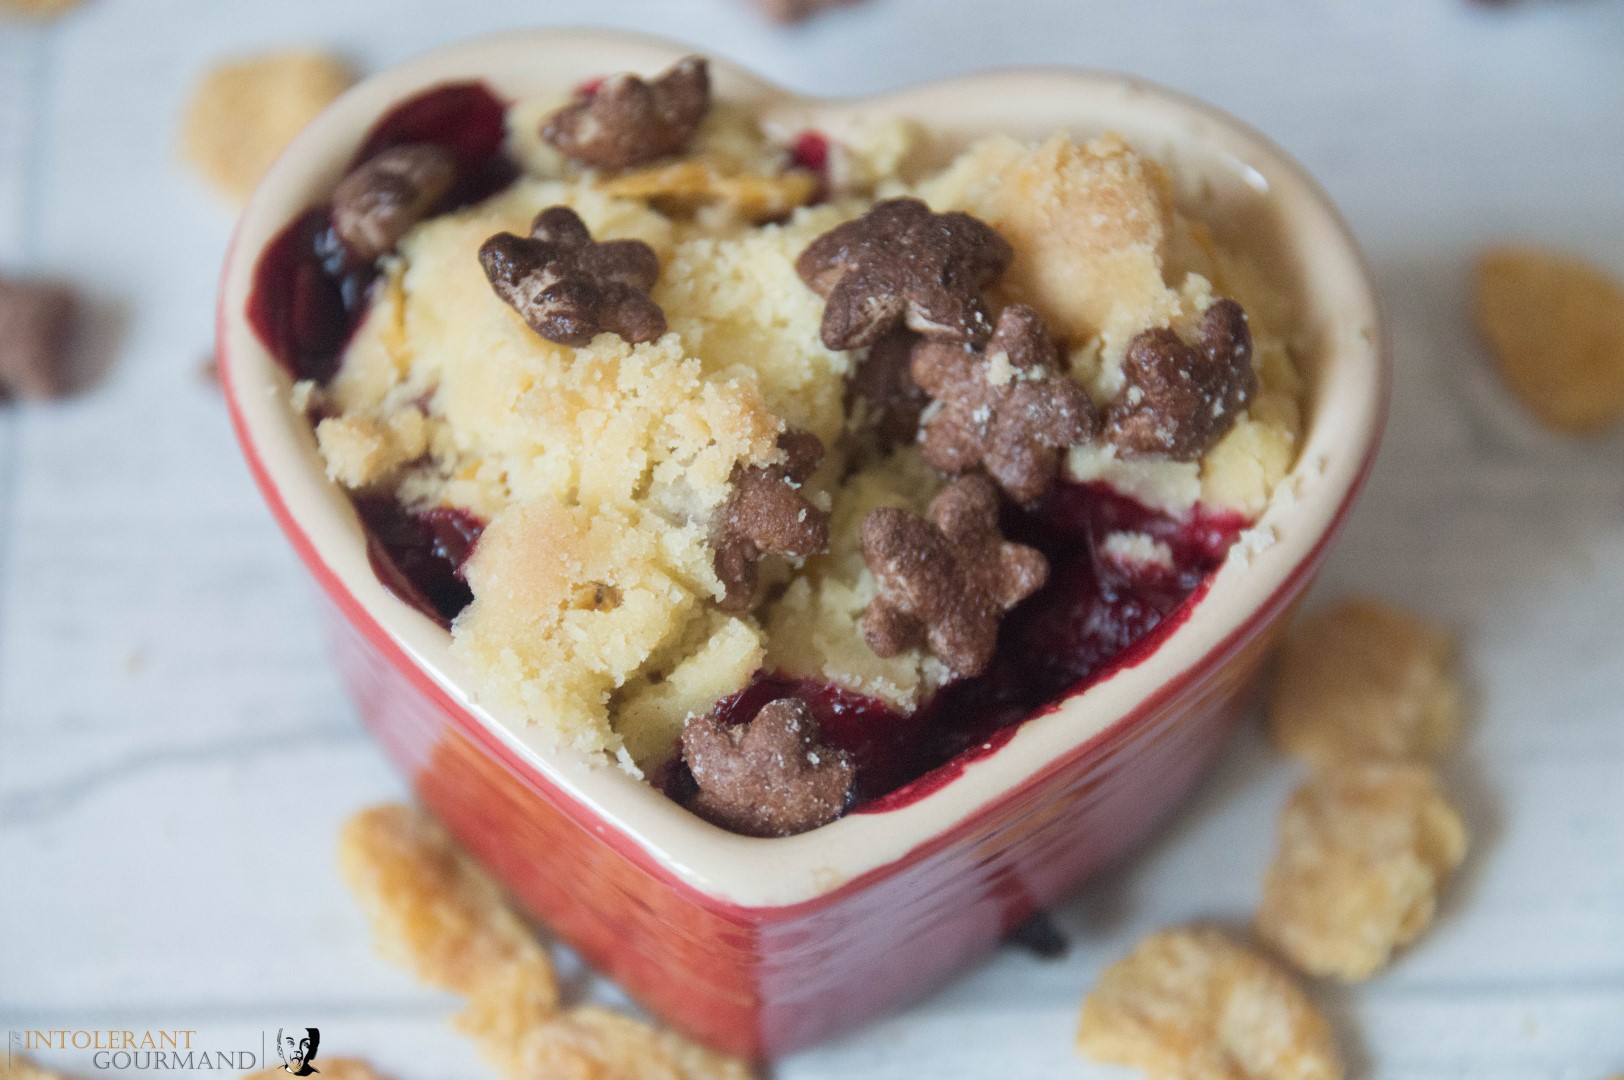 Mixed Berry Gluten Free Cobbler - a red heart shaped bowl filled with Mixed Berry Gluten Free Cobbler and a sprinkle of Cornflakes and Chocolate Stars on the white table. www.intolerantgourmand.com